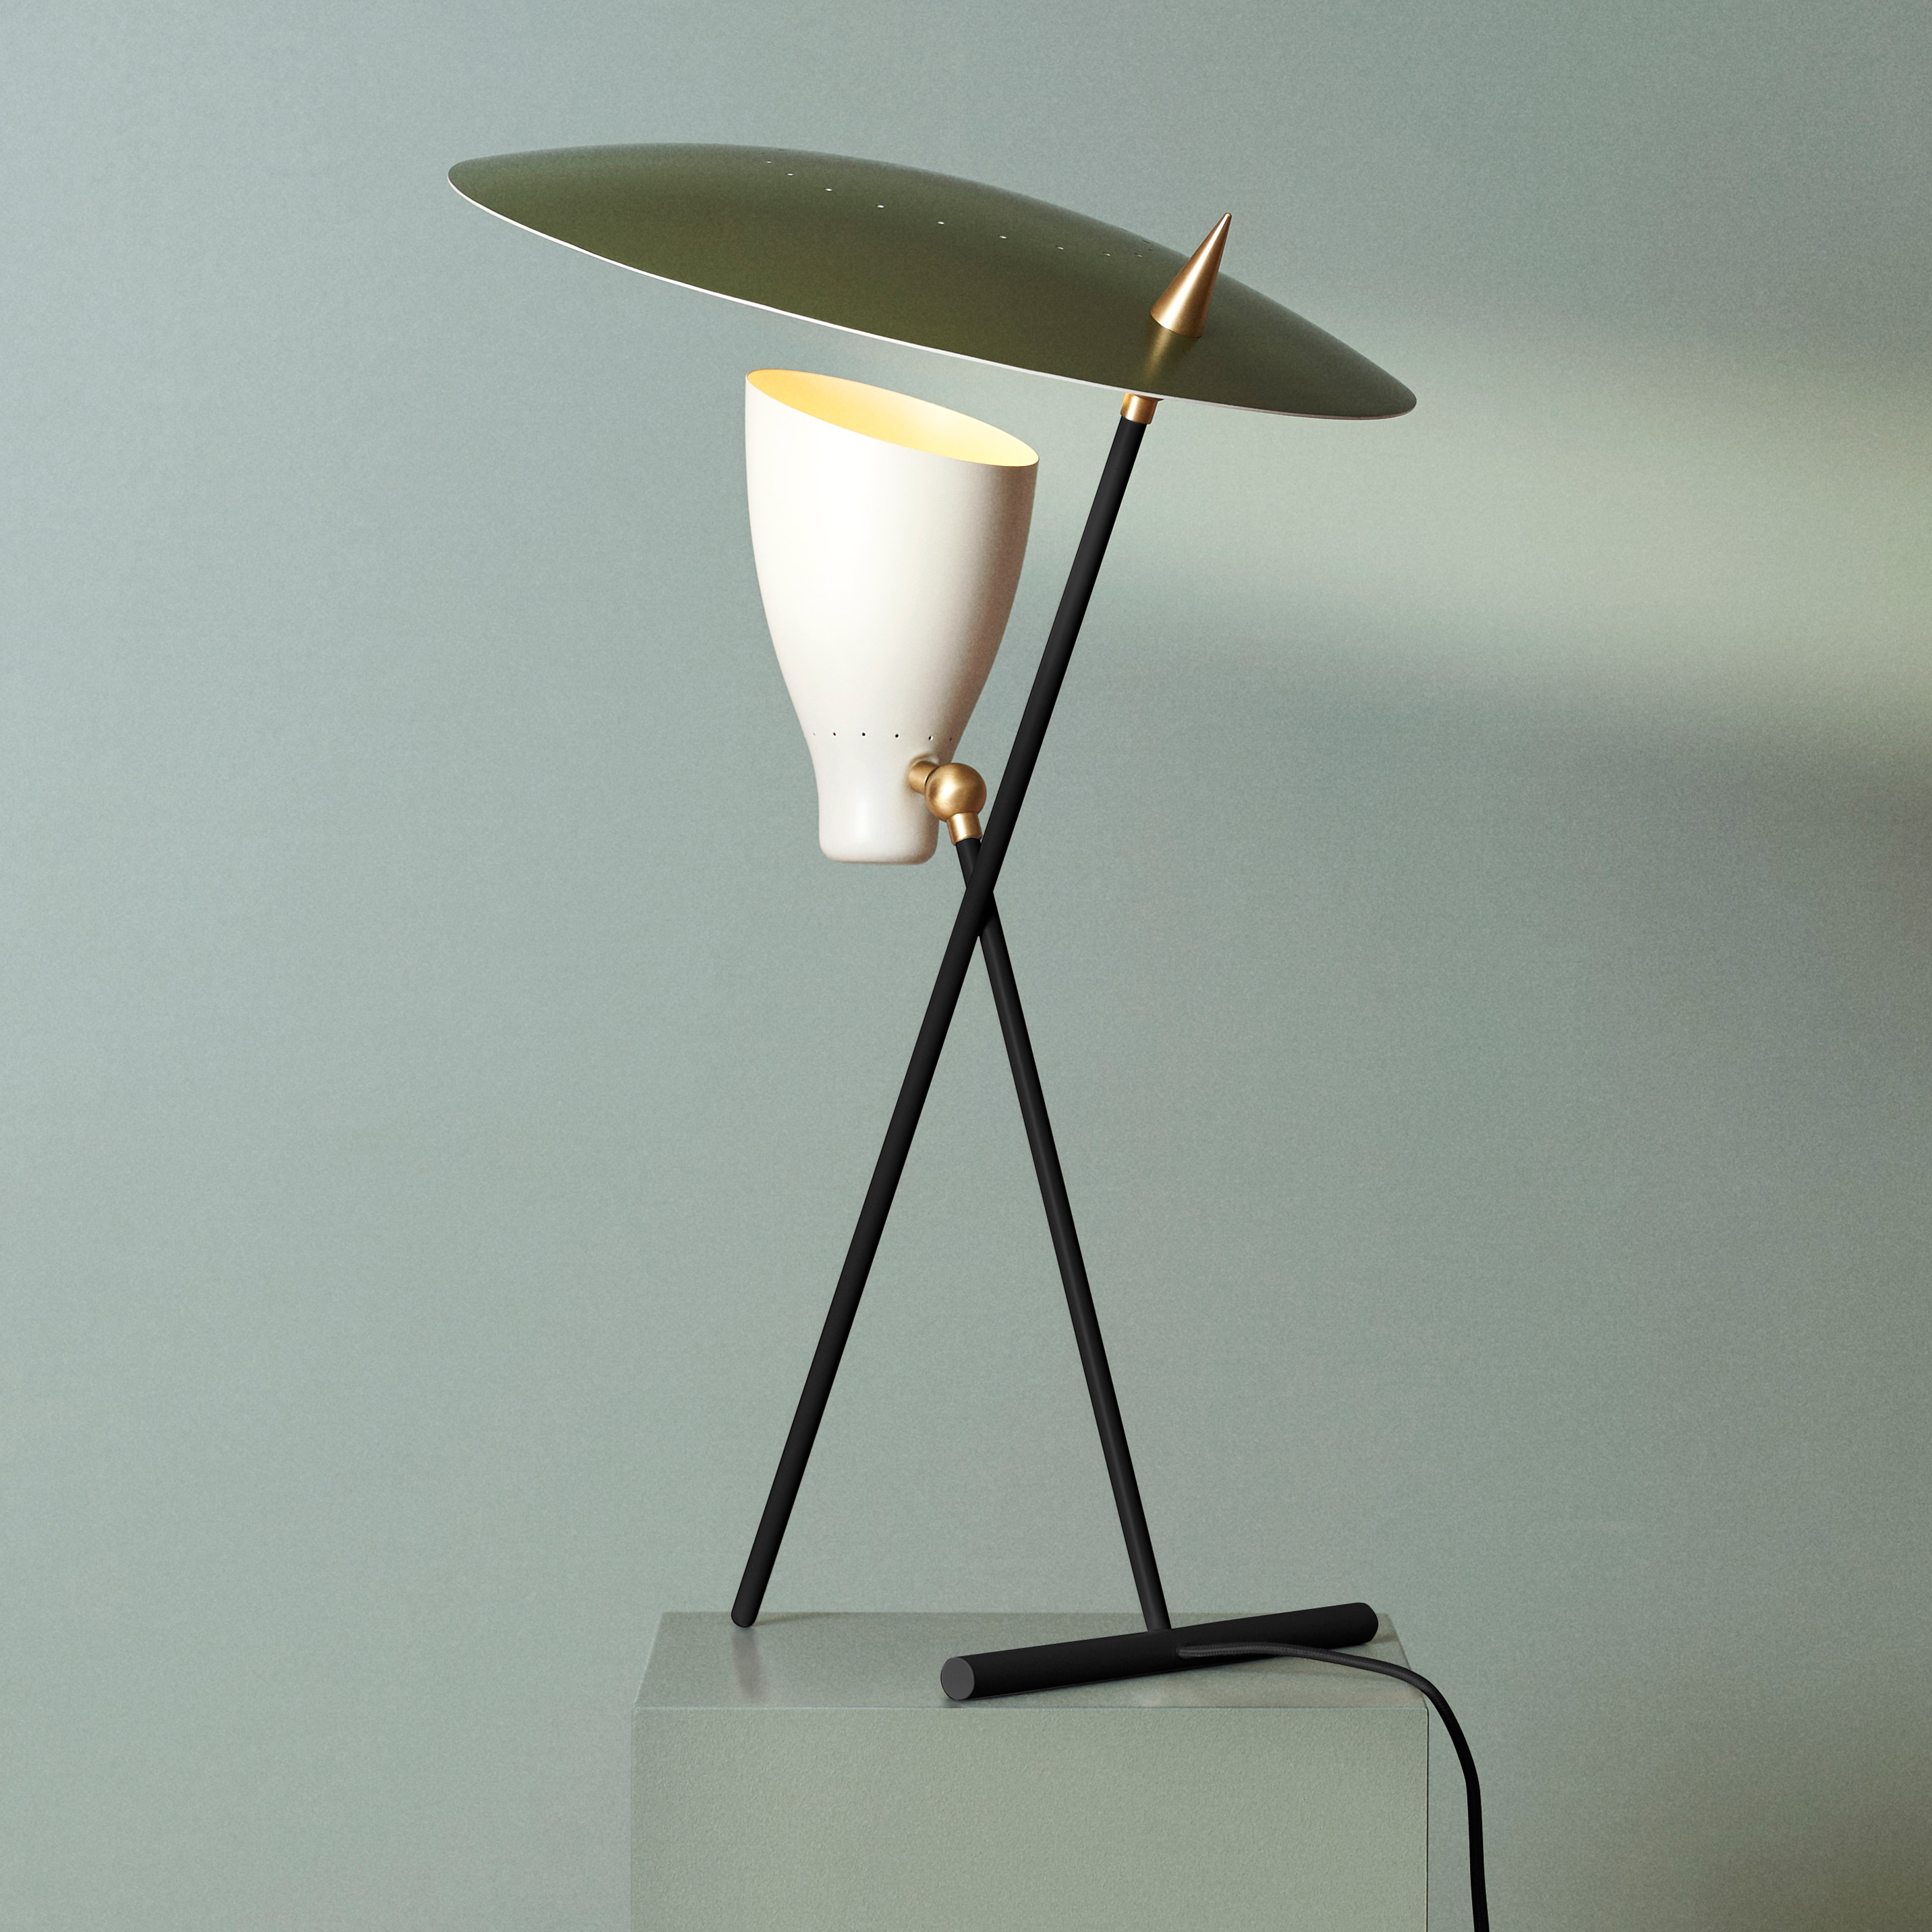 Christmas 2018 gifts for architects and designers: Table Lamp by Warm Nordic